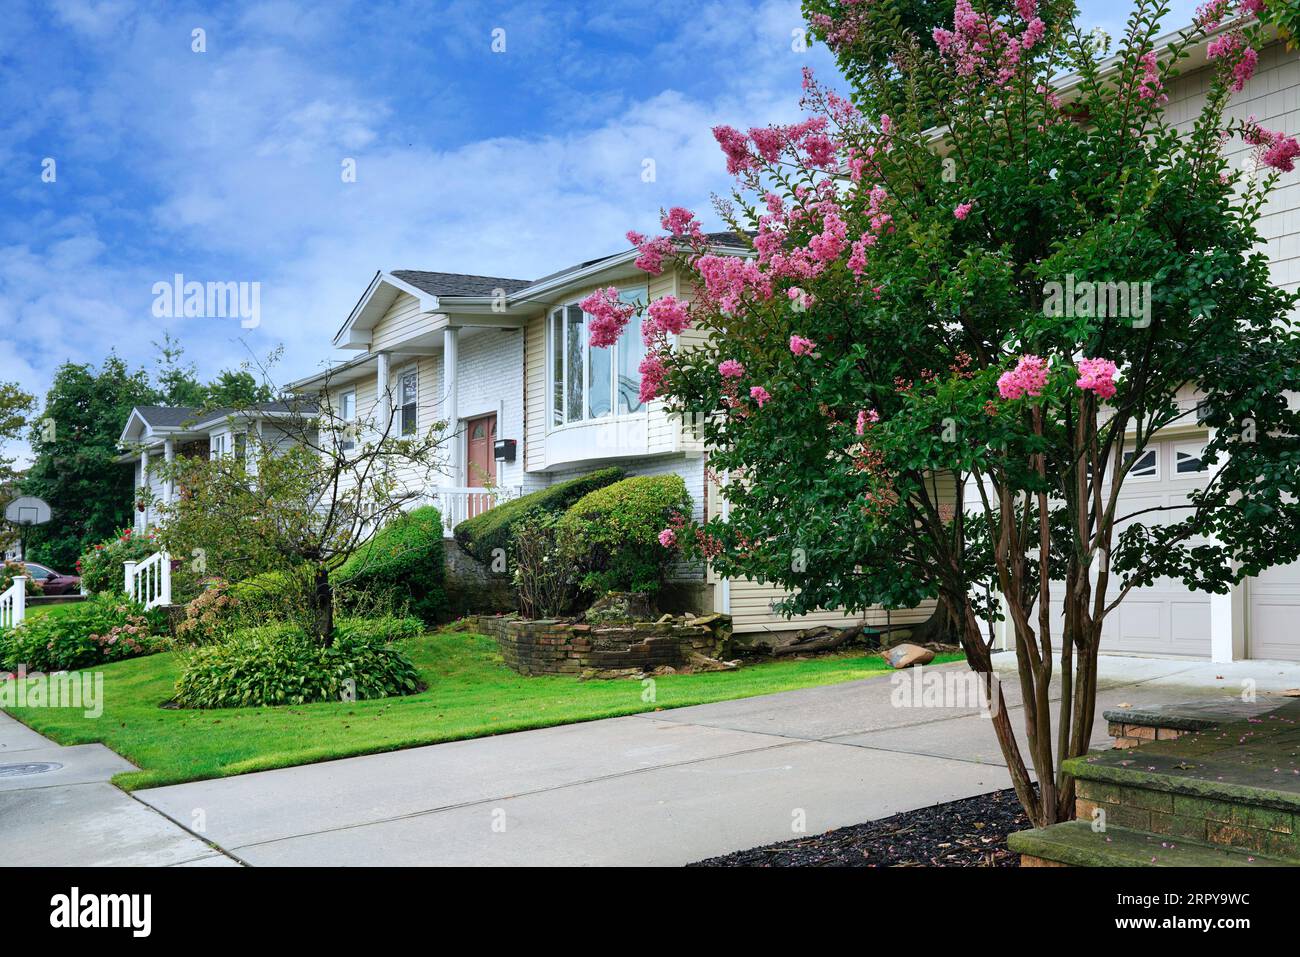 Suburban street with large detached houses and front gardens Stock Photo